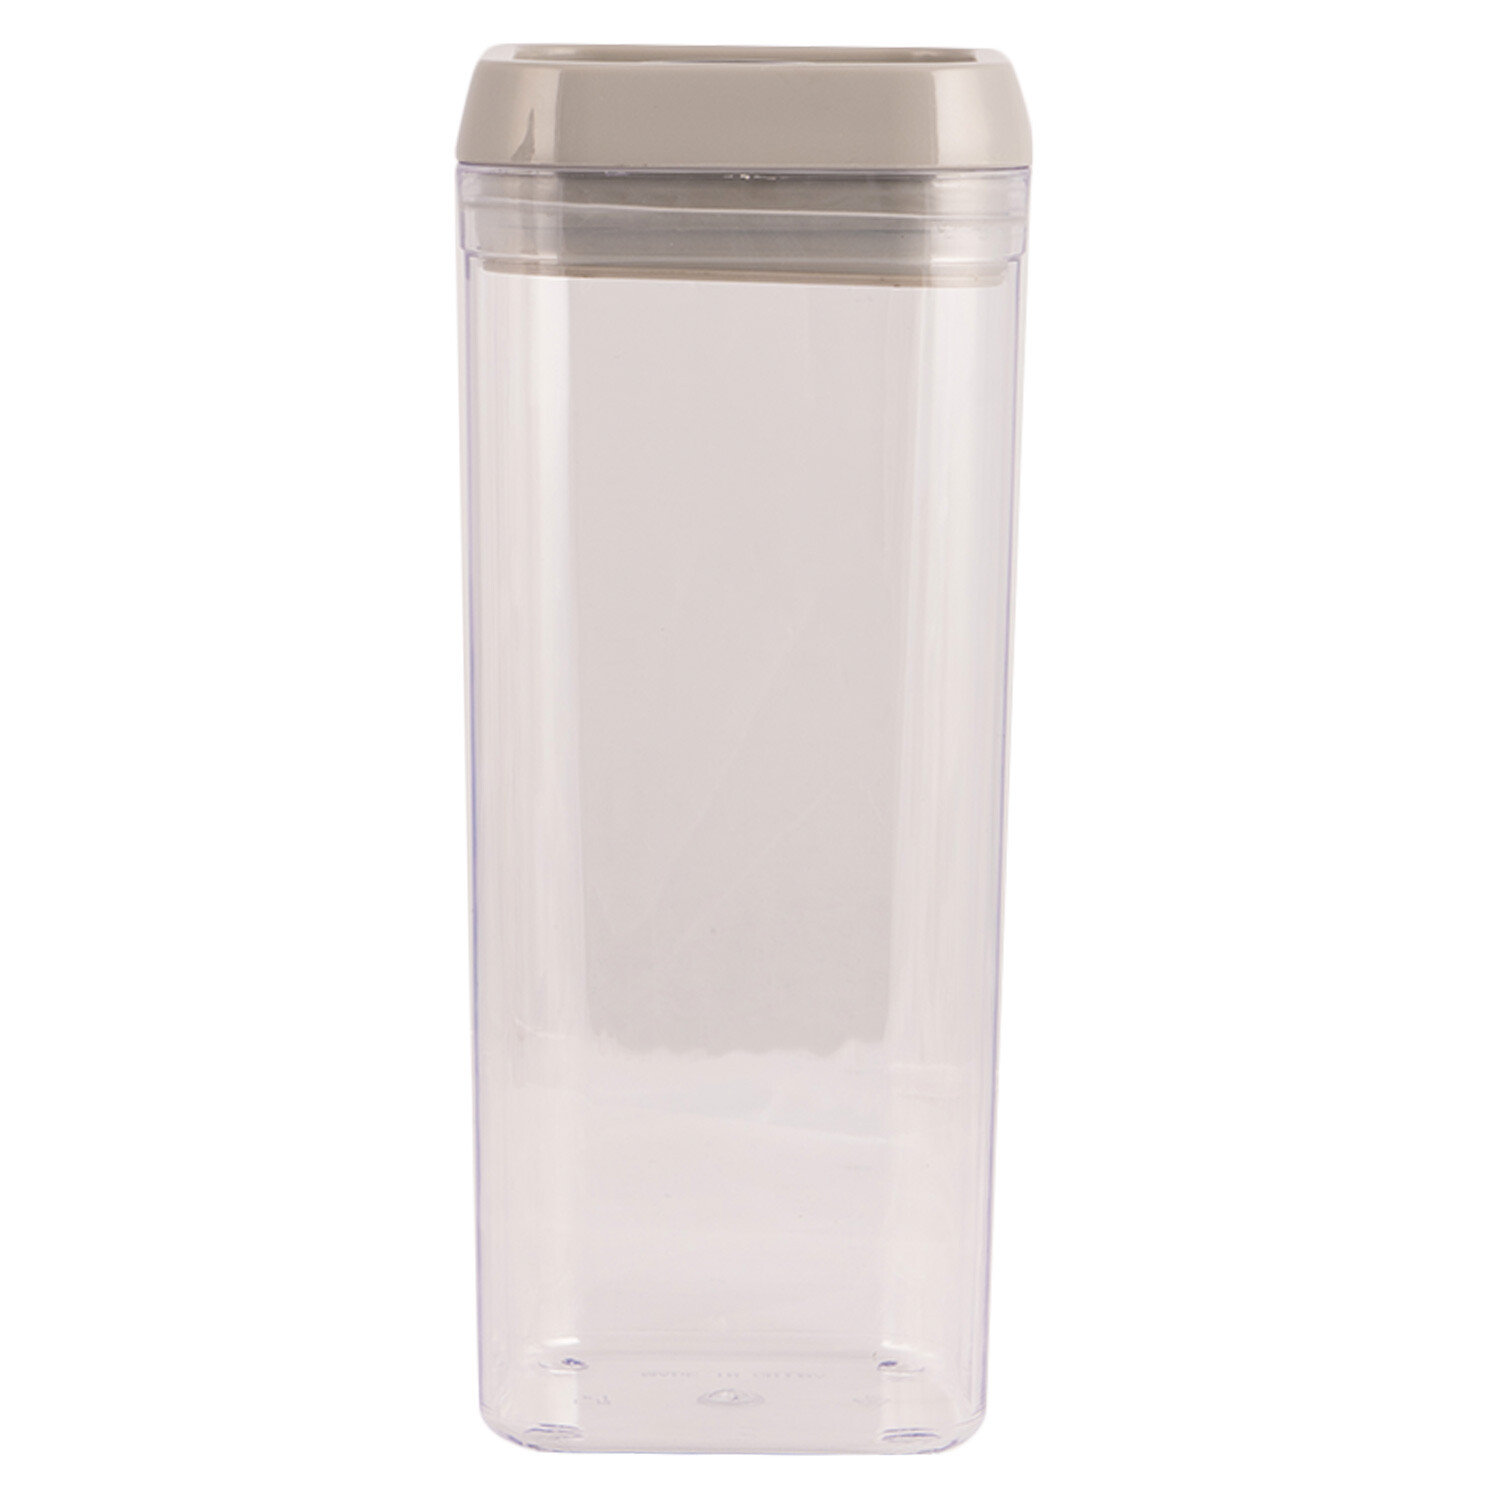 Airtight Food Container - 1.5l Image